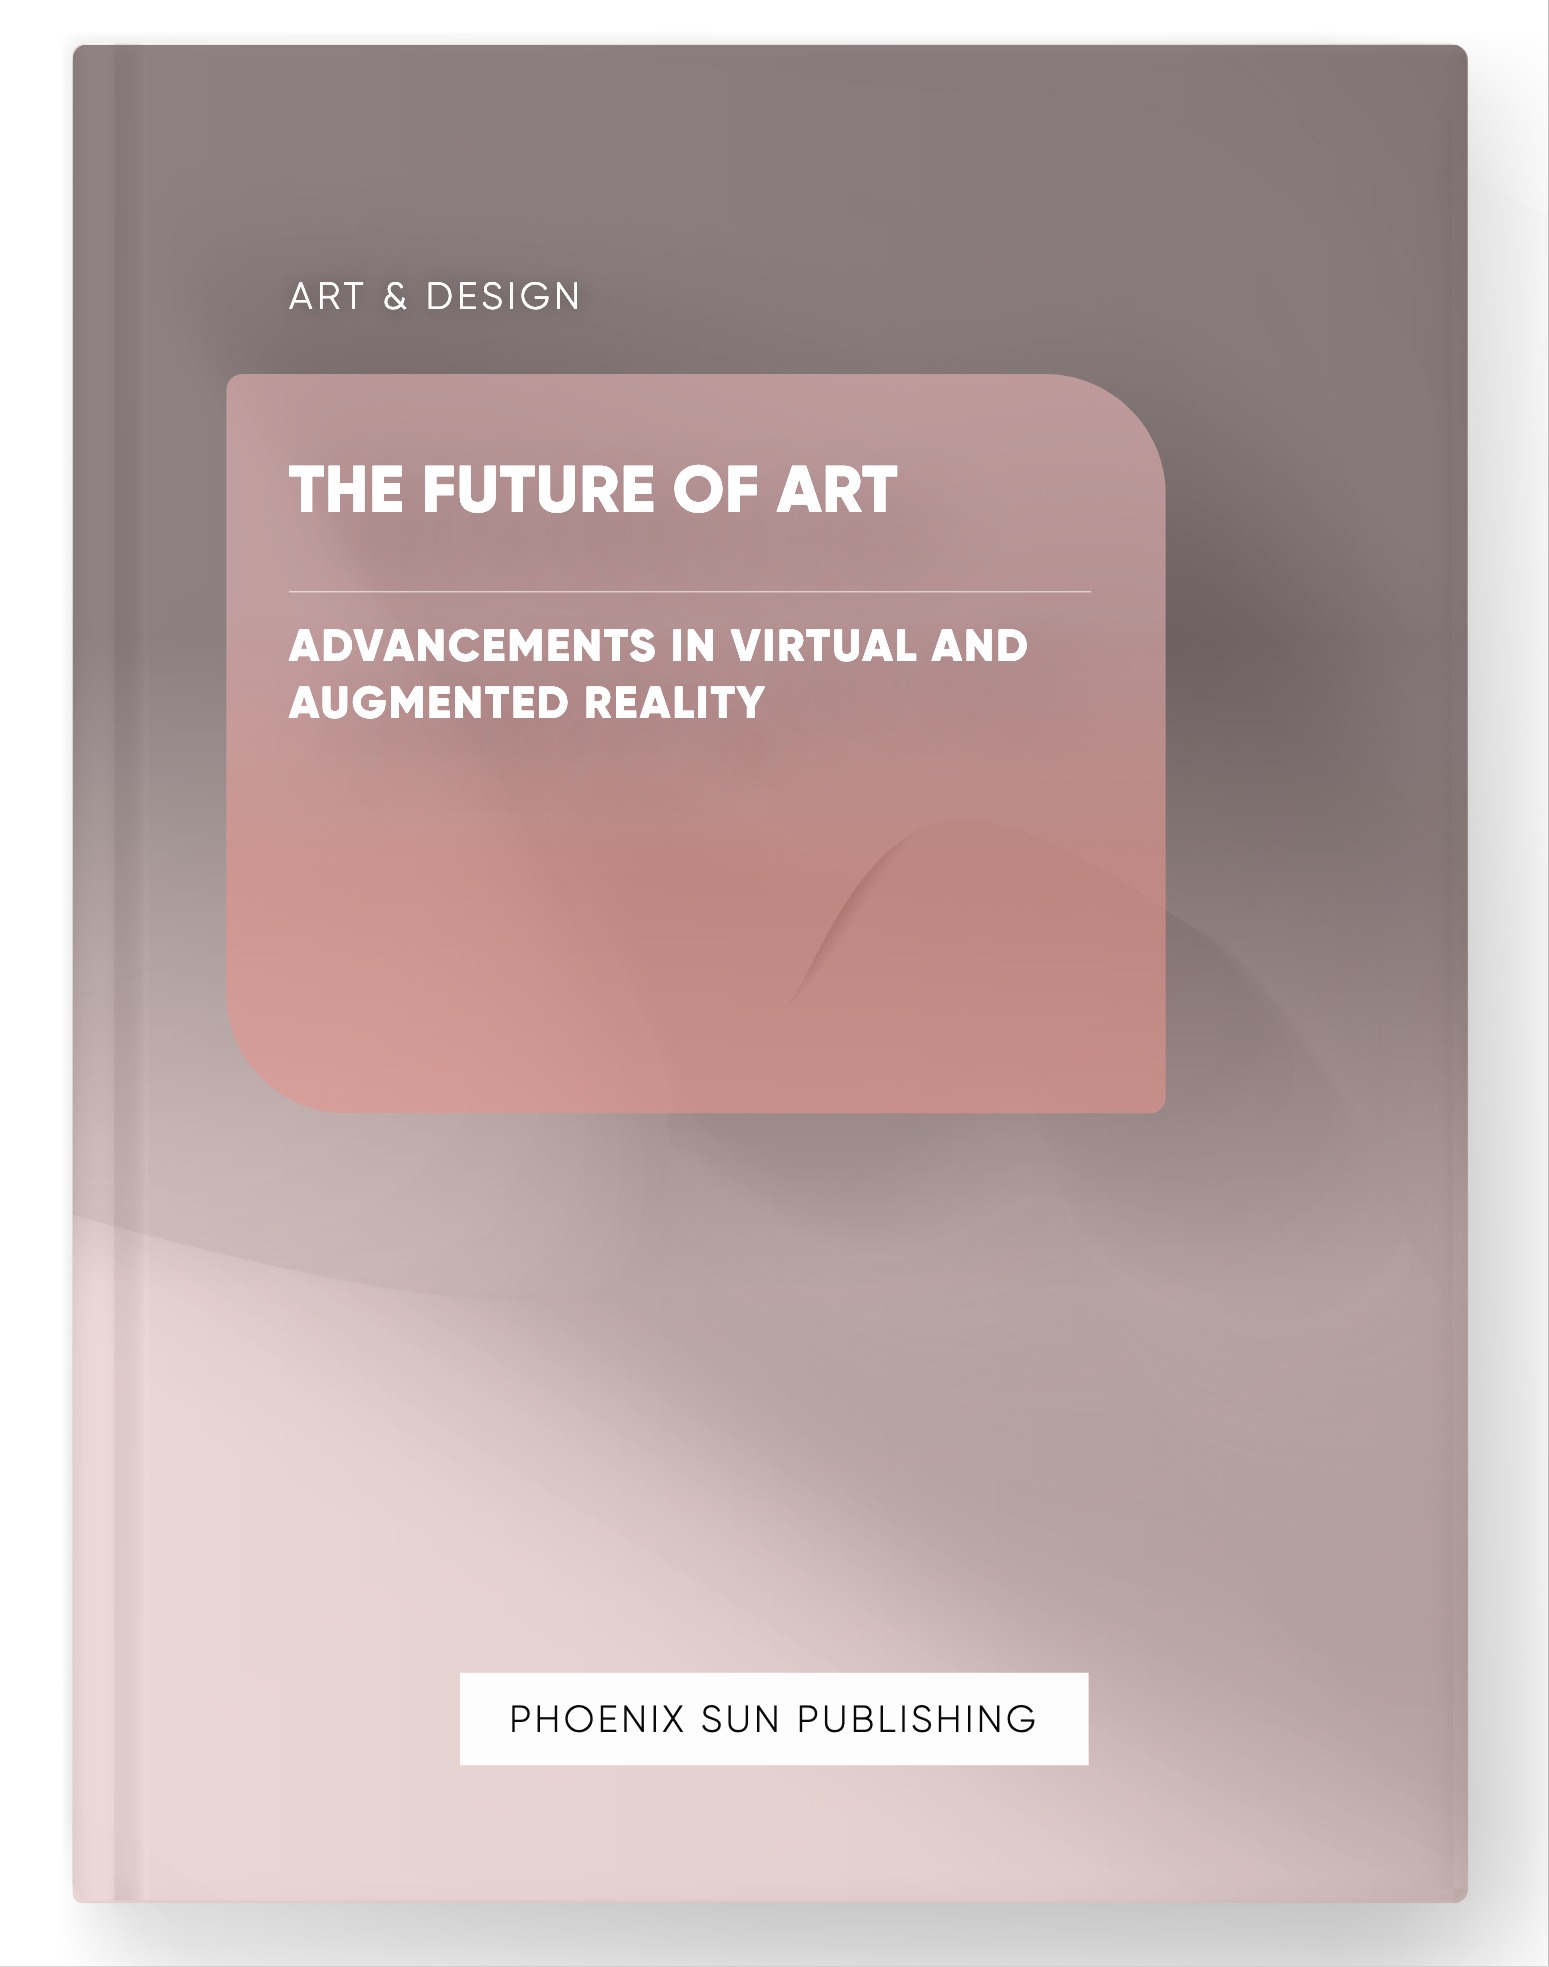 The Future of Art – Advancements in Virtual and Augmented Reality